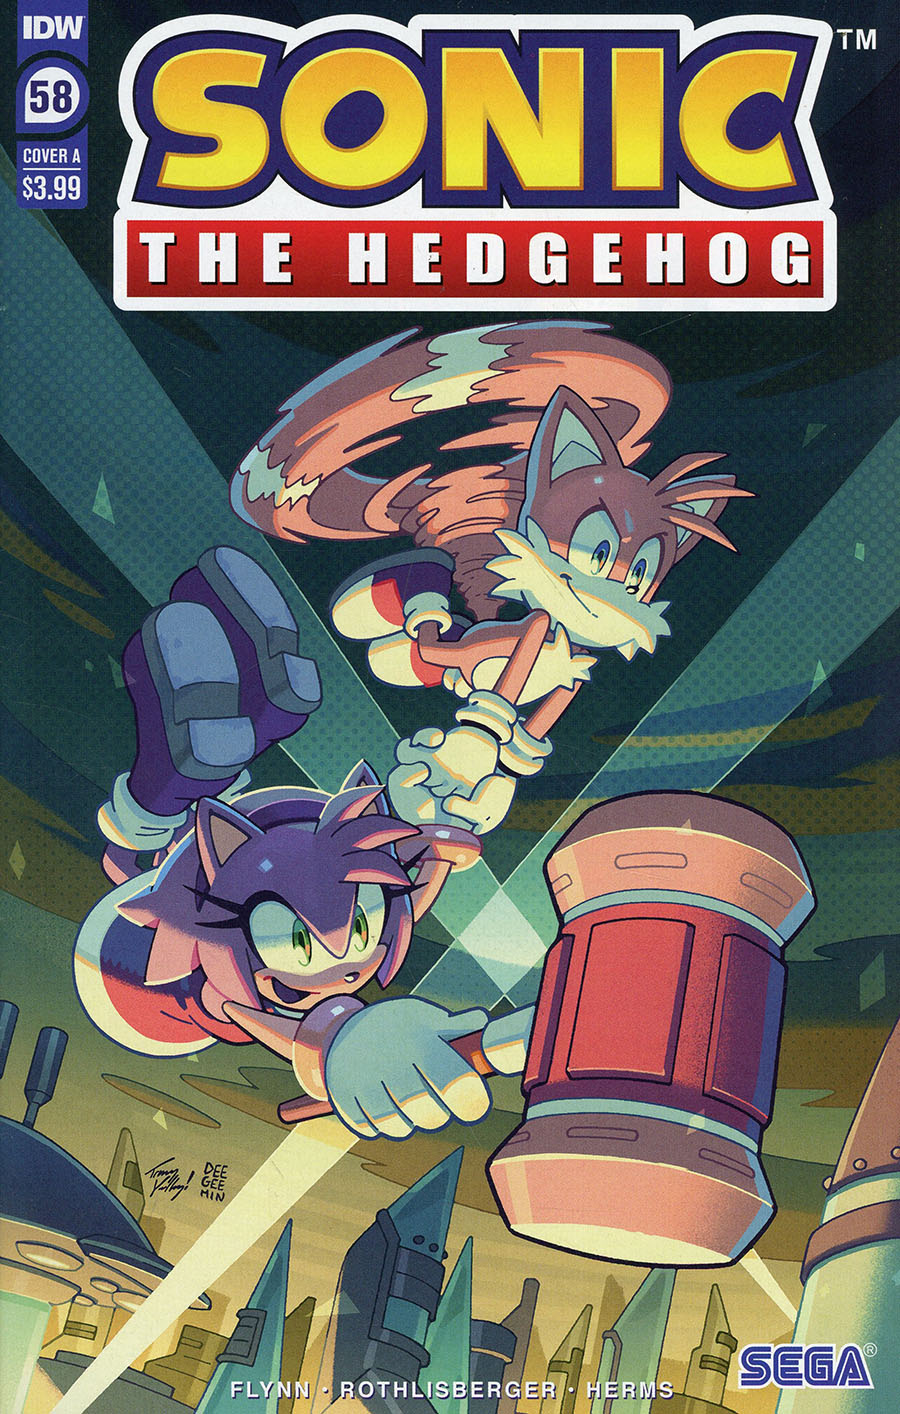 Sonic The Hedgehog Vol 3 #58 Cover A Regular Tracy Yardley Cover